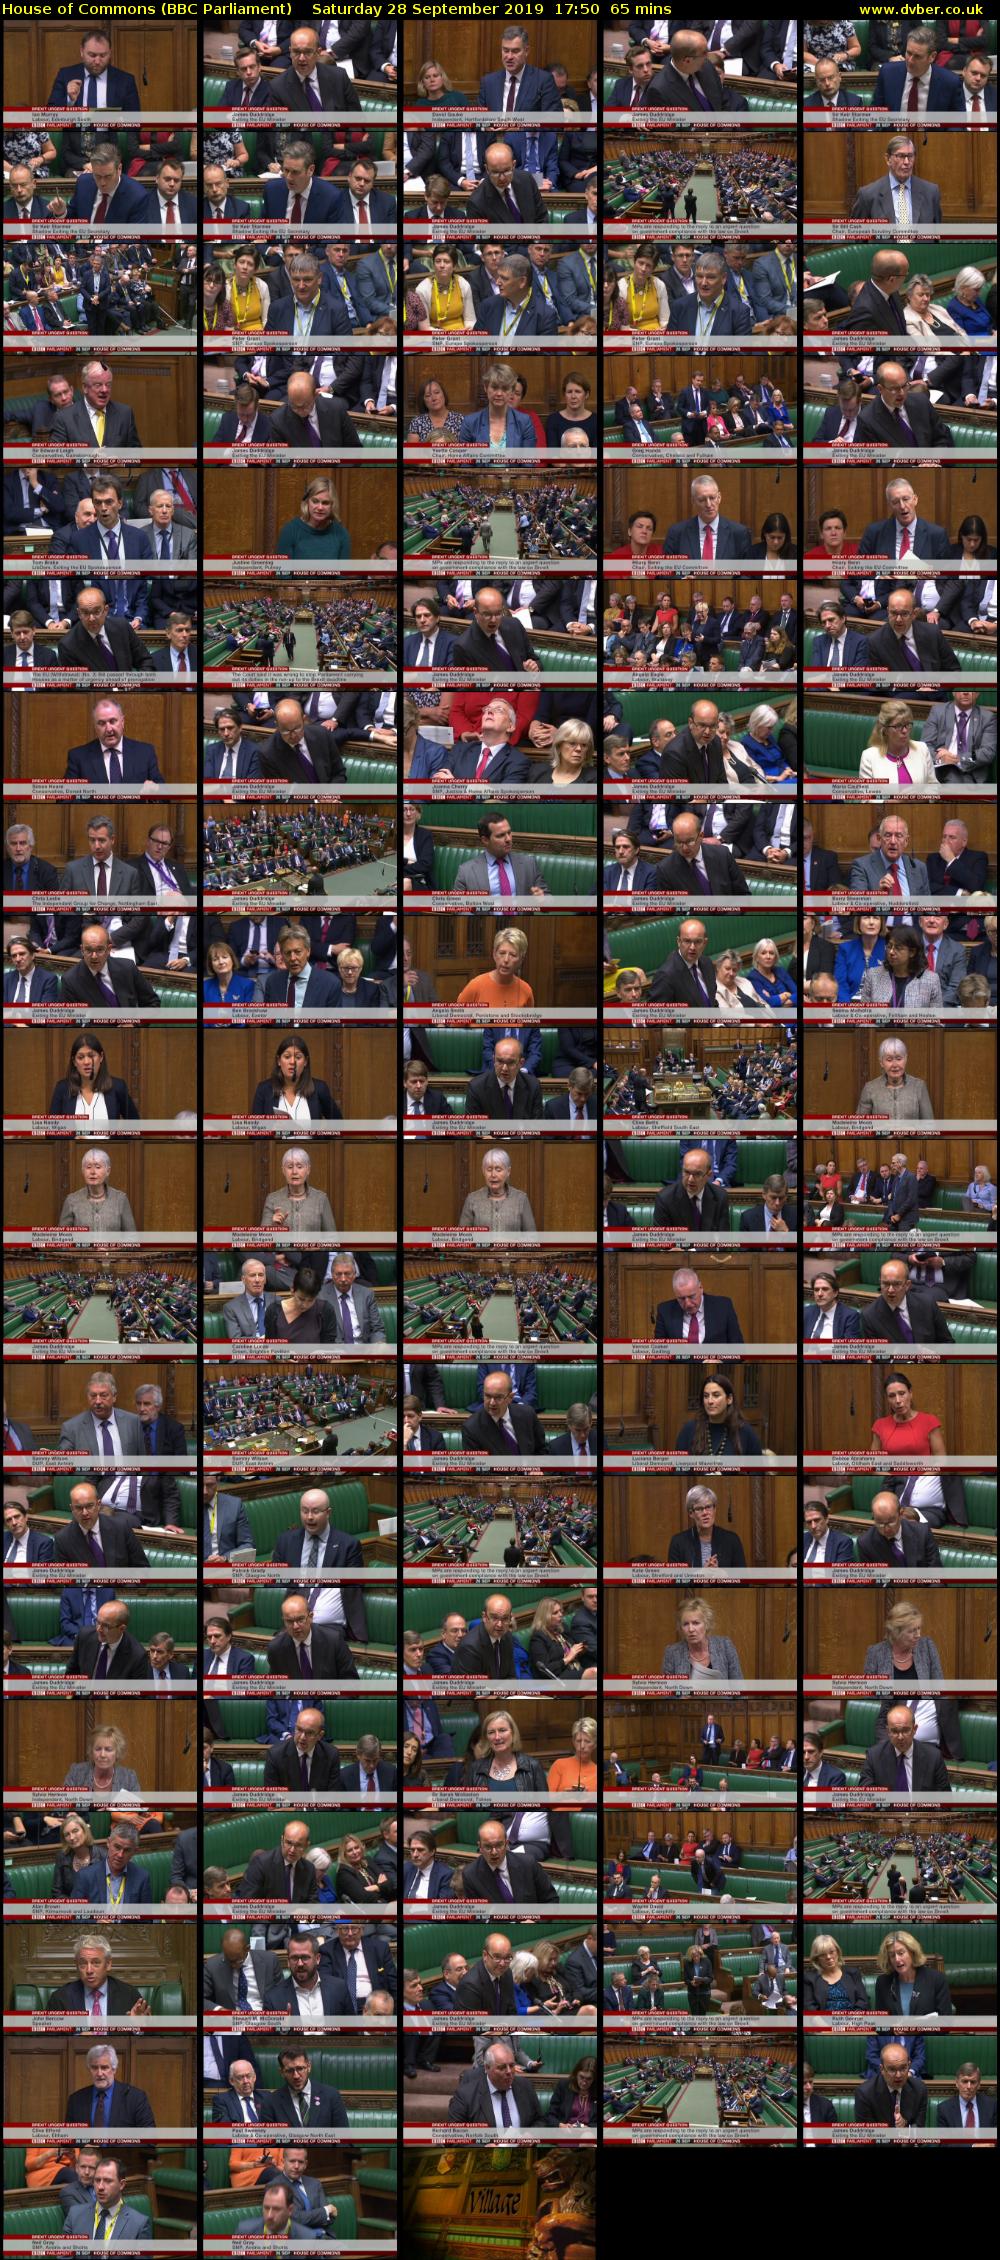 House of Commons (BBC Parliament) Saturday 28 September 2019 17:50 - 18:55